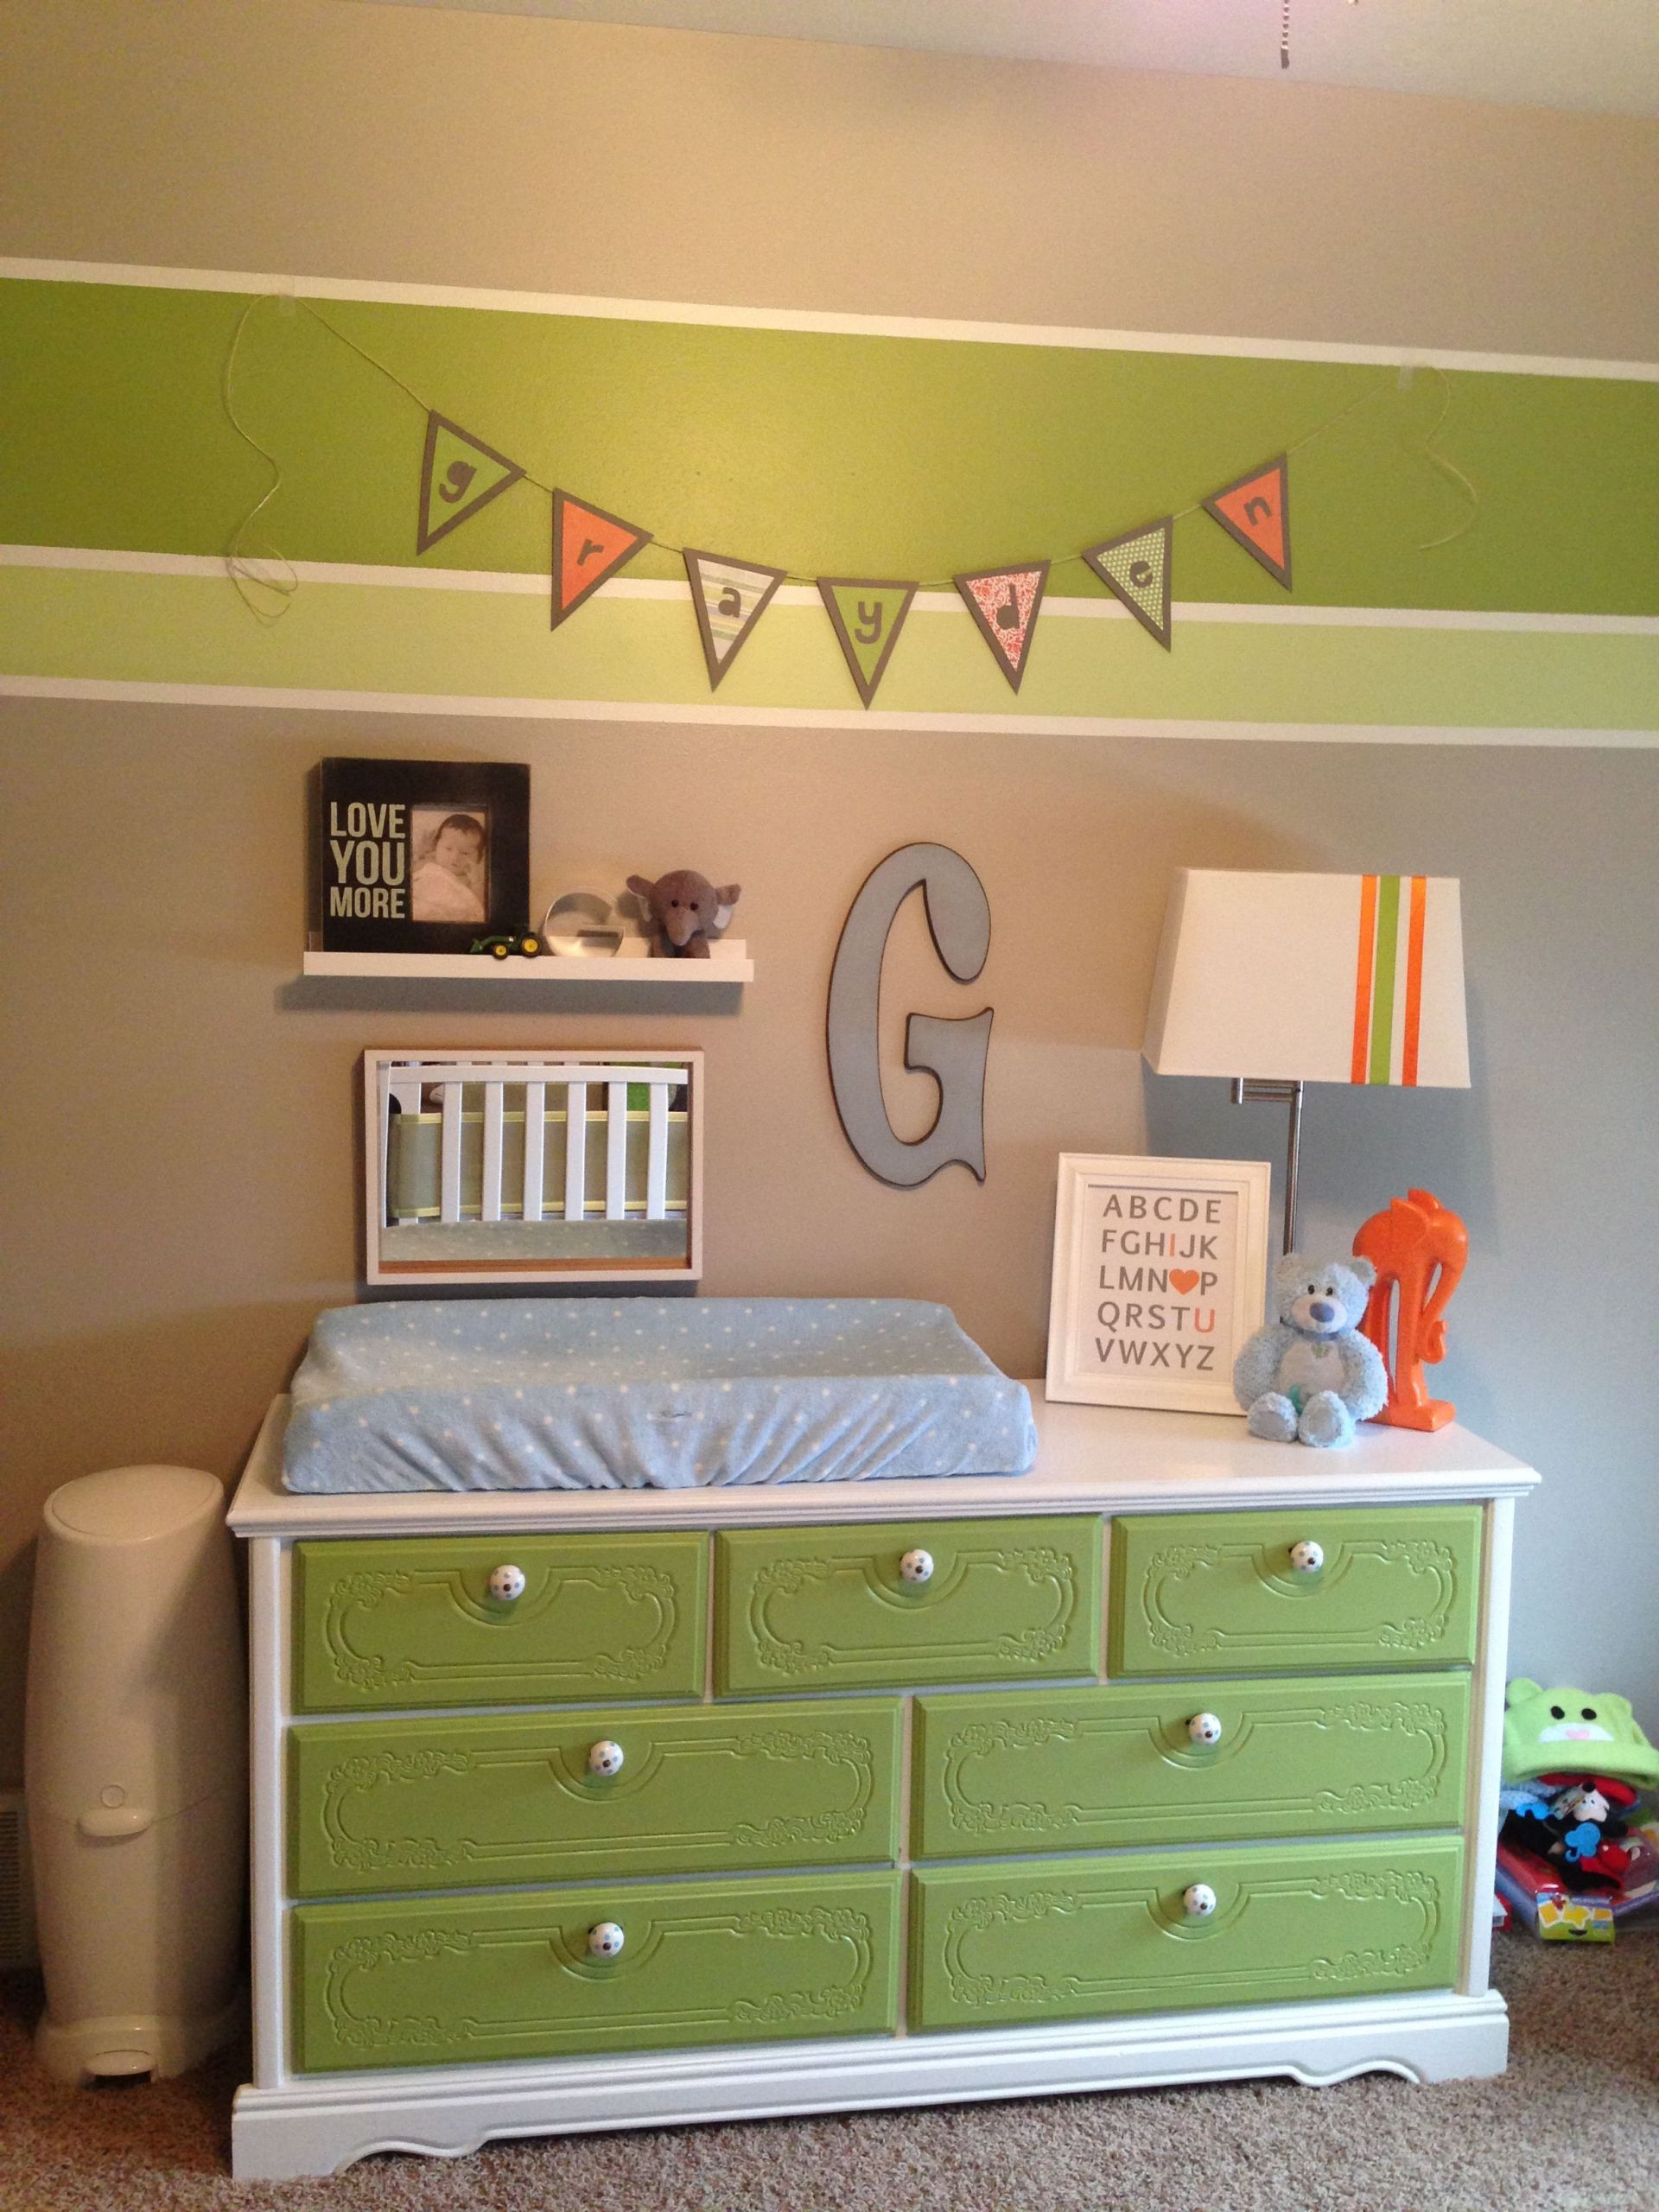 DIY Baby Change Table
 DIY changing table this is what I want to do with my